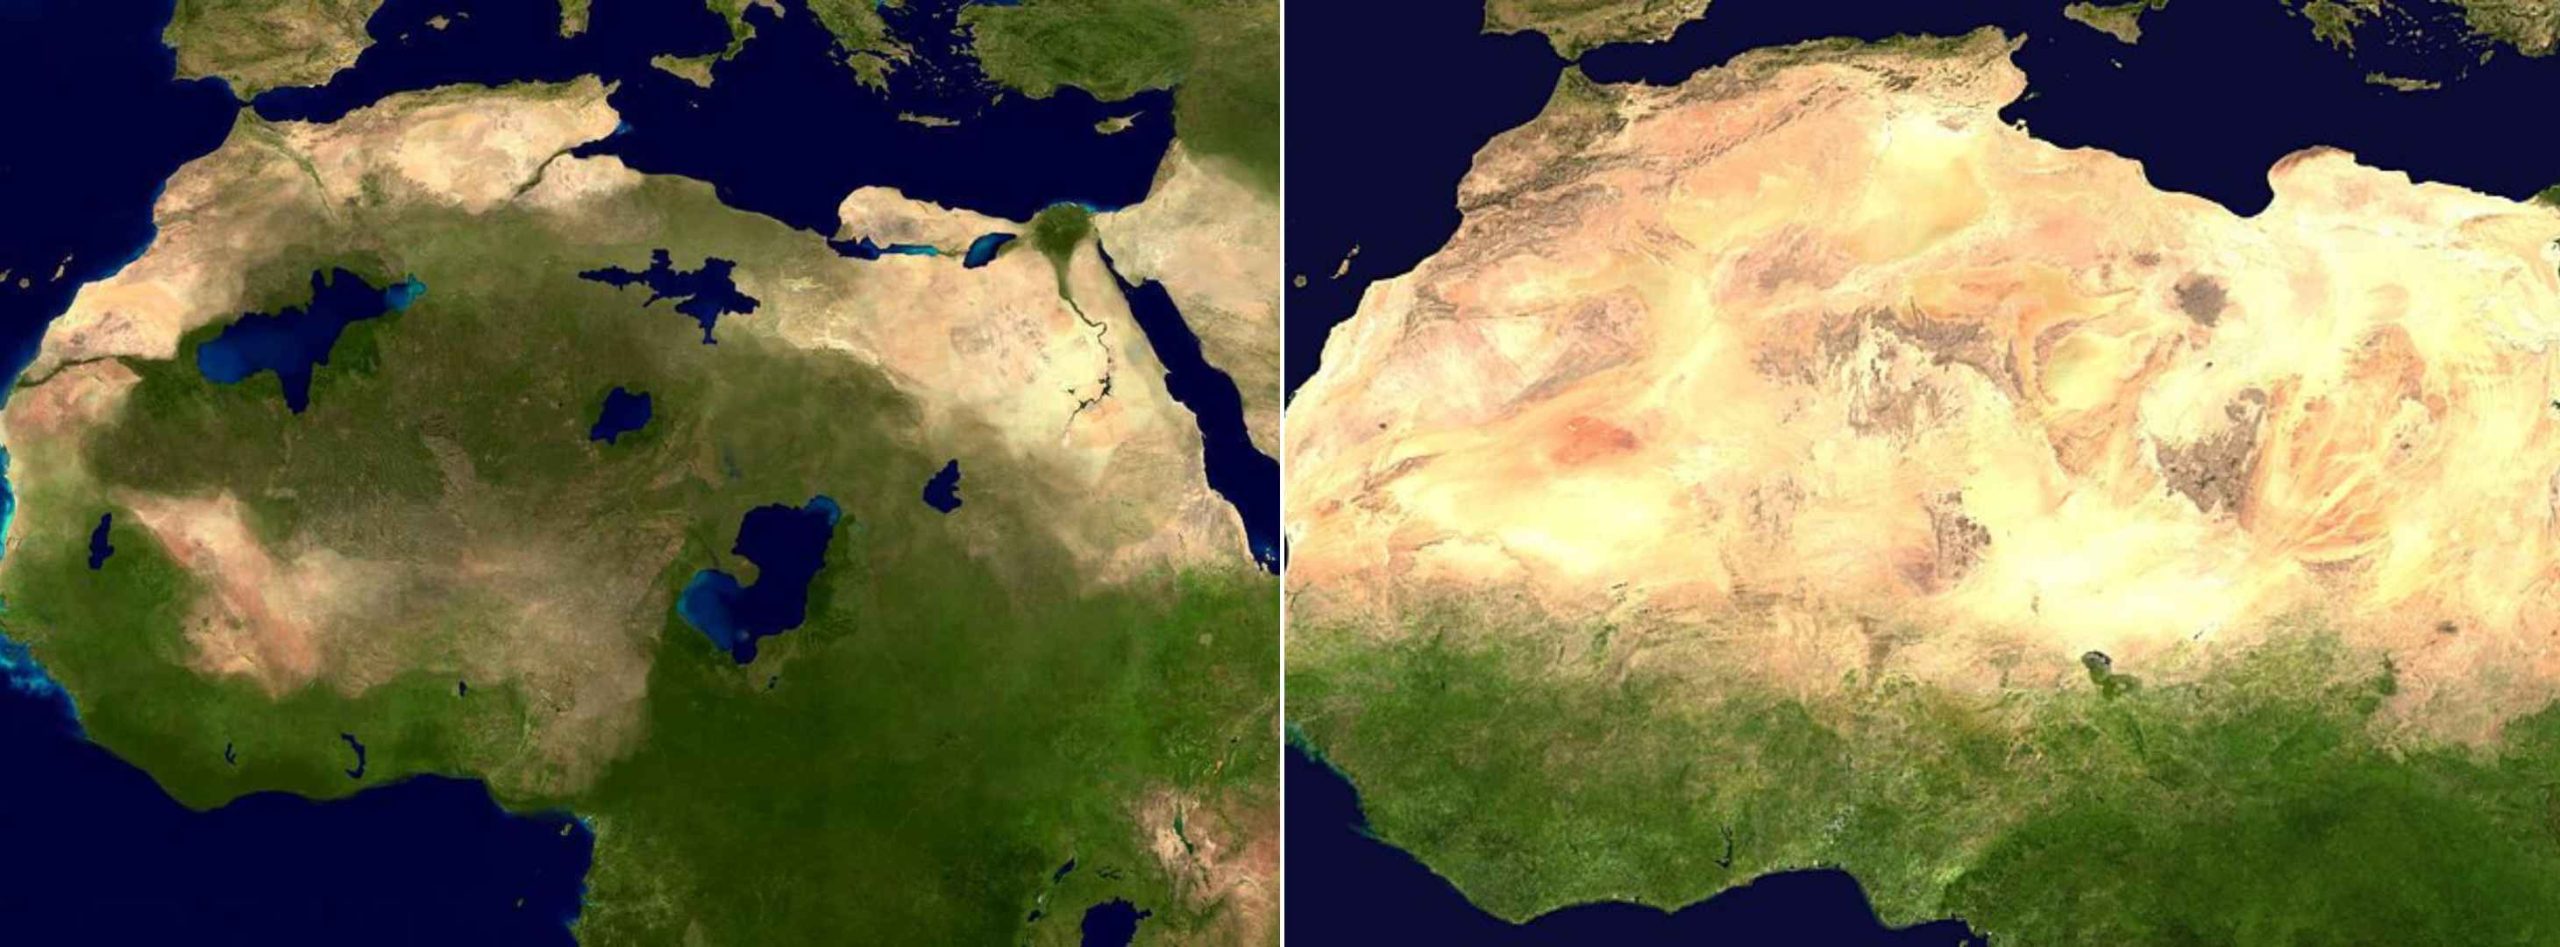 Earth's Changing Orbit Turned Green Savannah Into The Sahara Desert,  Scientists Found - Orbital Today